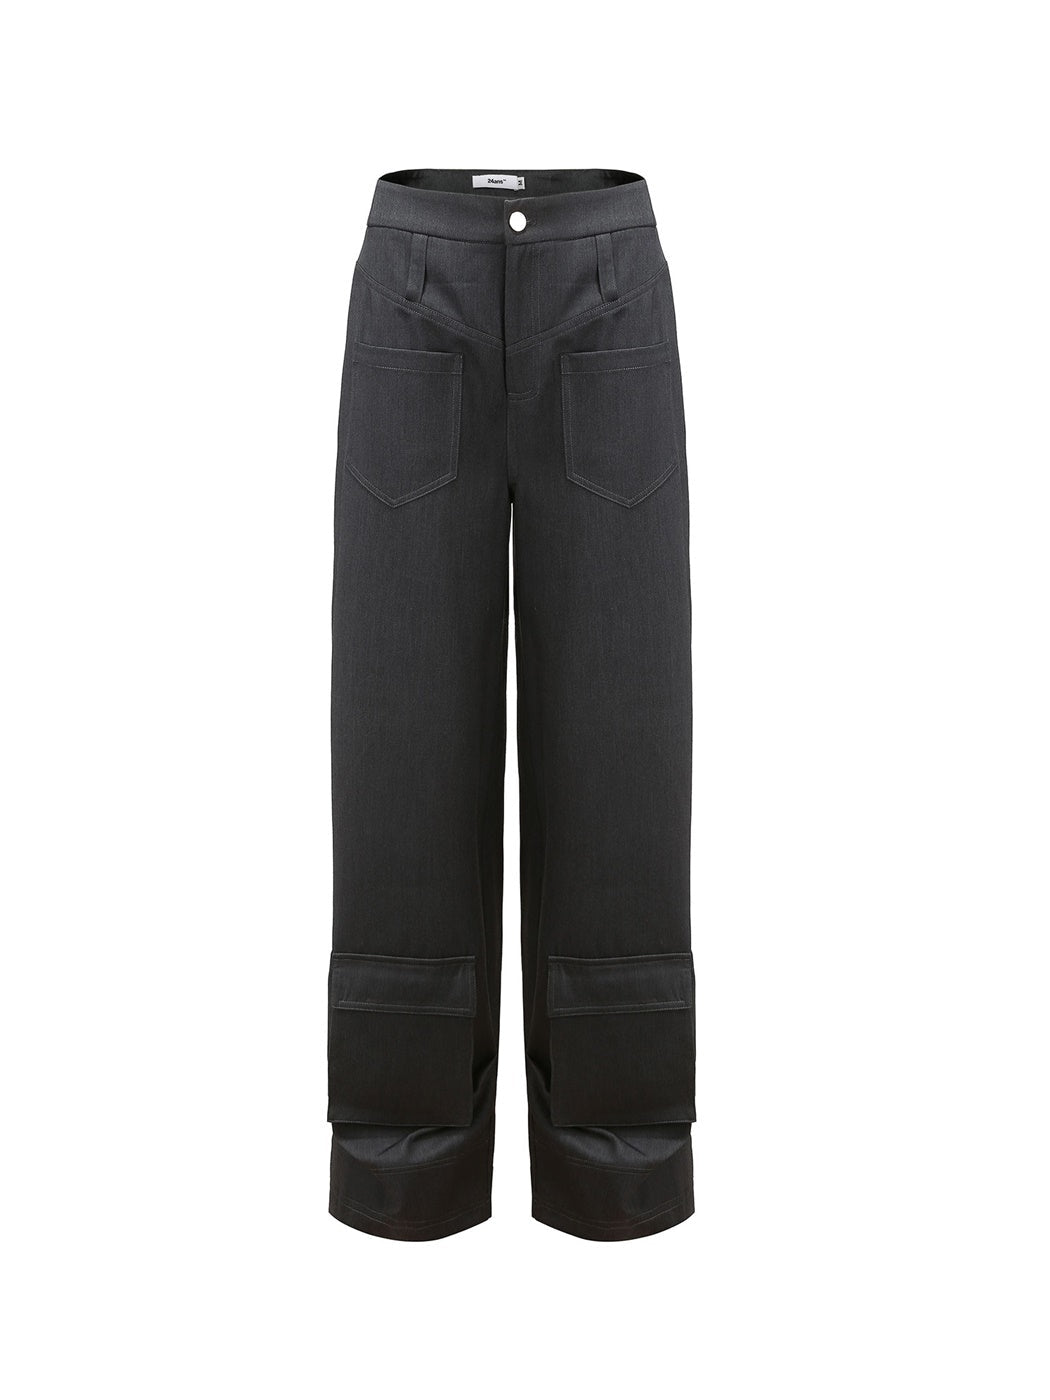 Relaxed Fit Trousers For Casual Comfort - chiclara